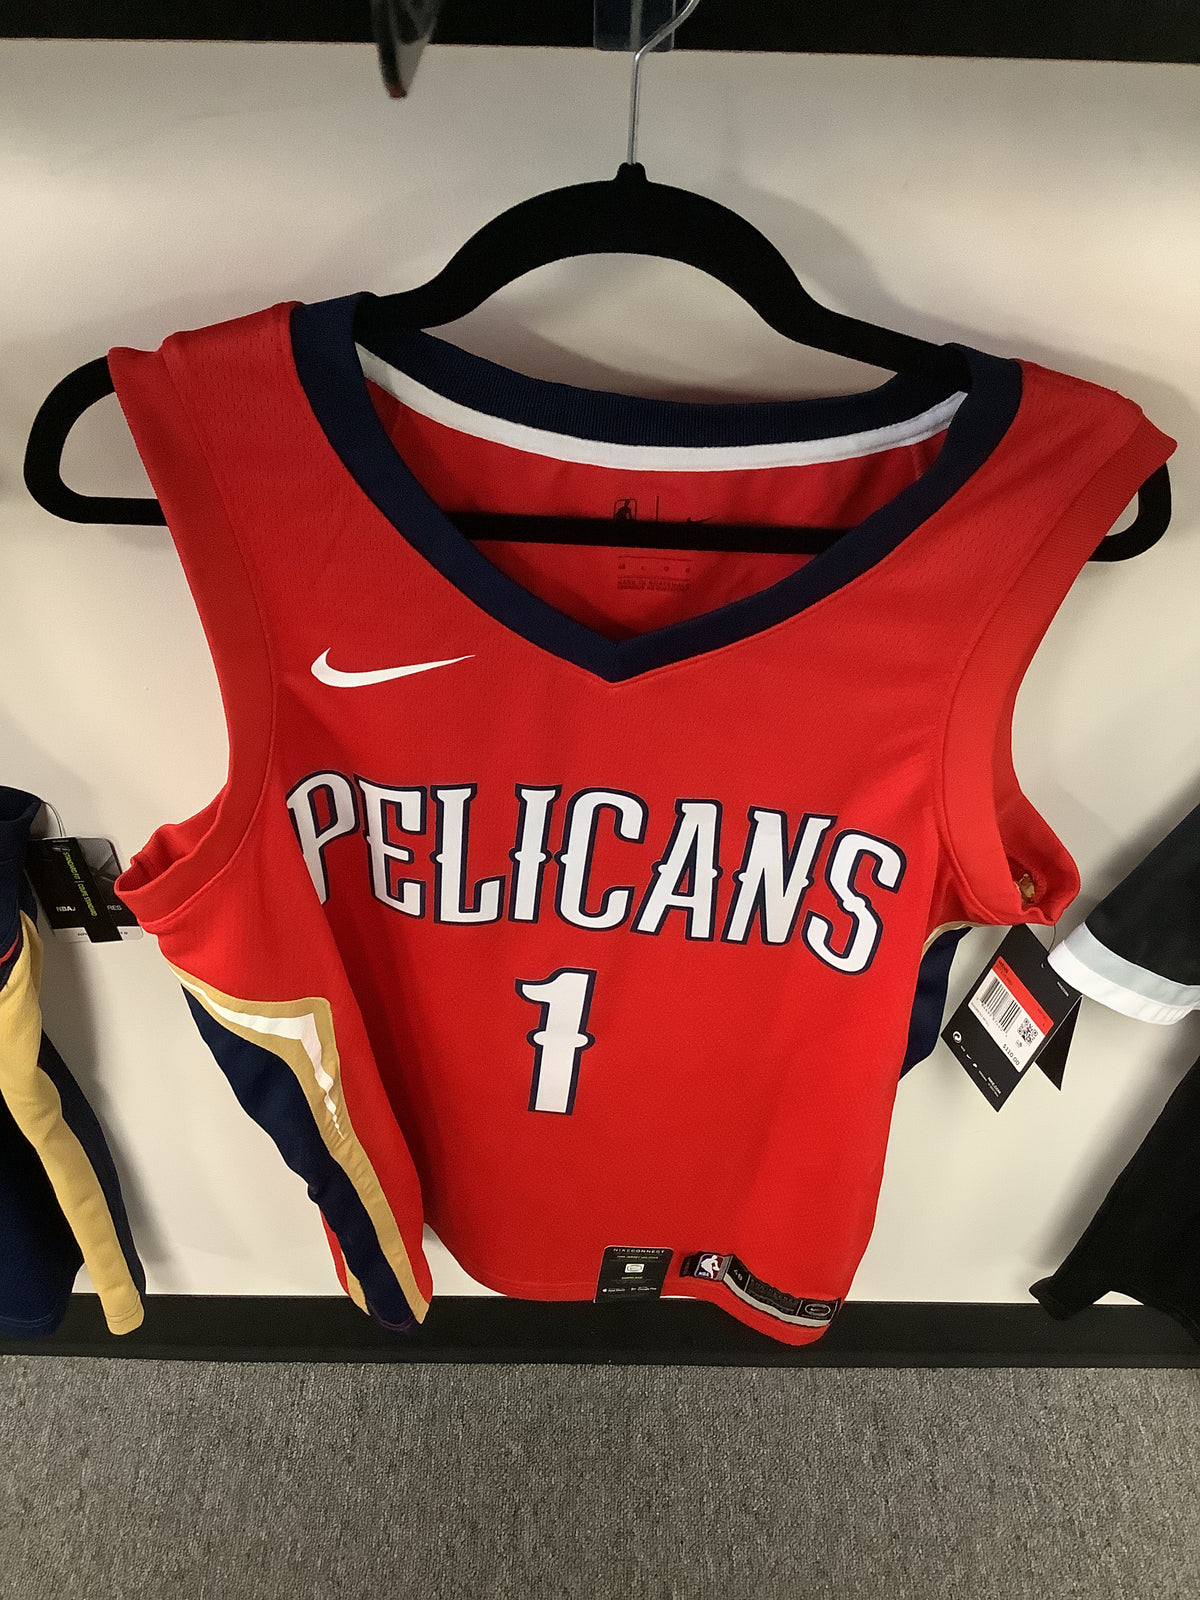 Zion Williamson New Orleans Pelicans Nike Fanatics Autographed Basketball Jersey